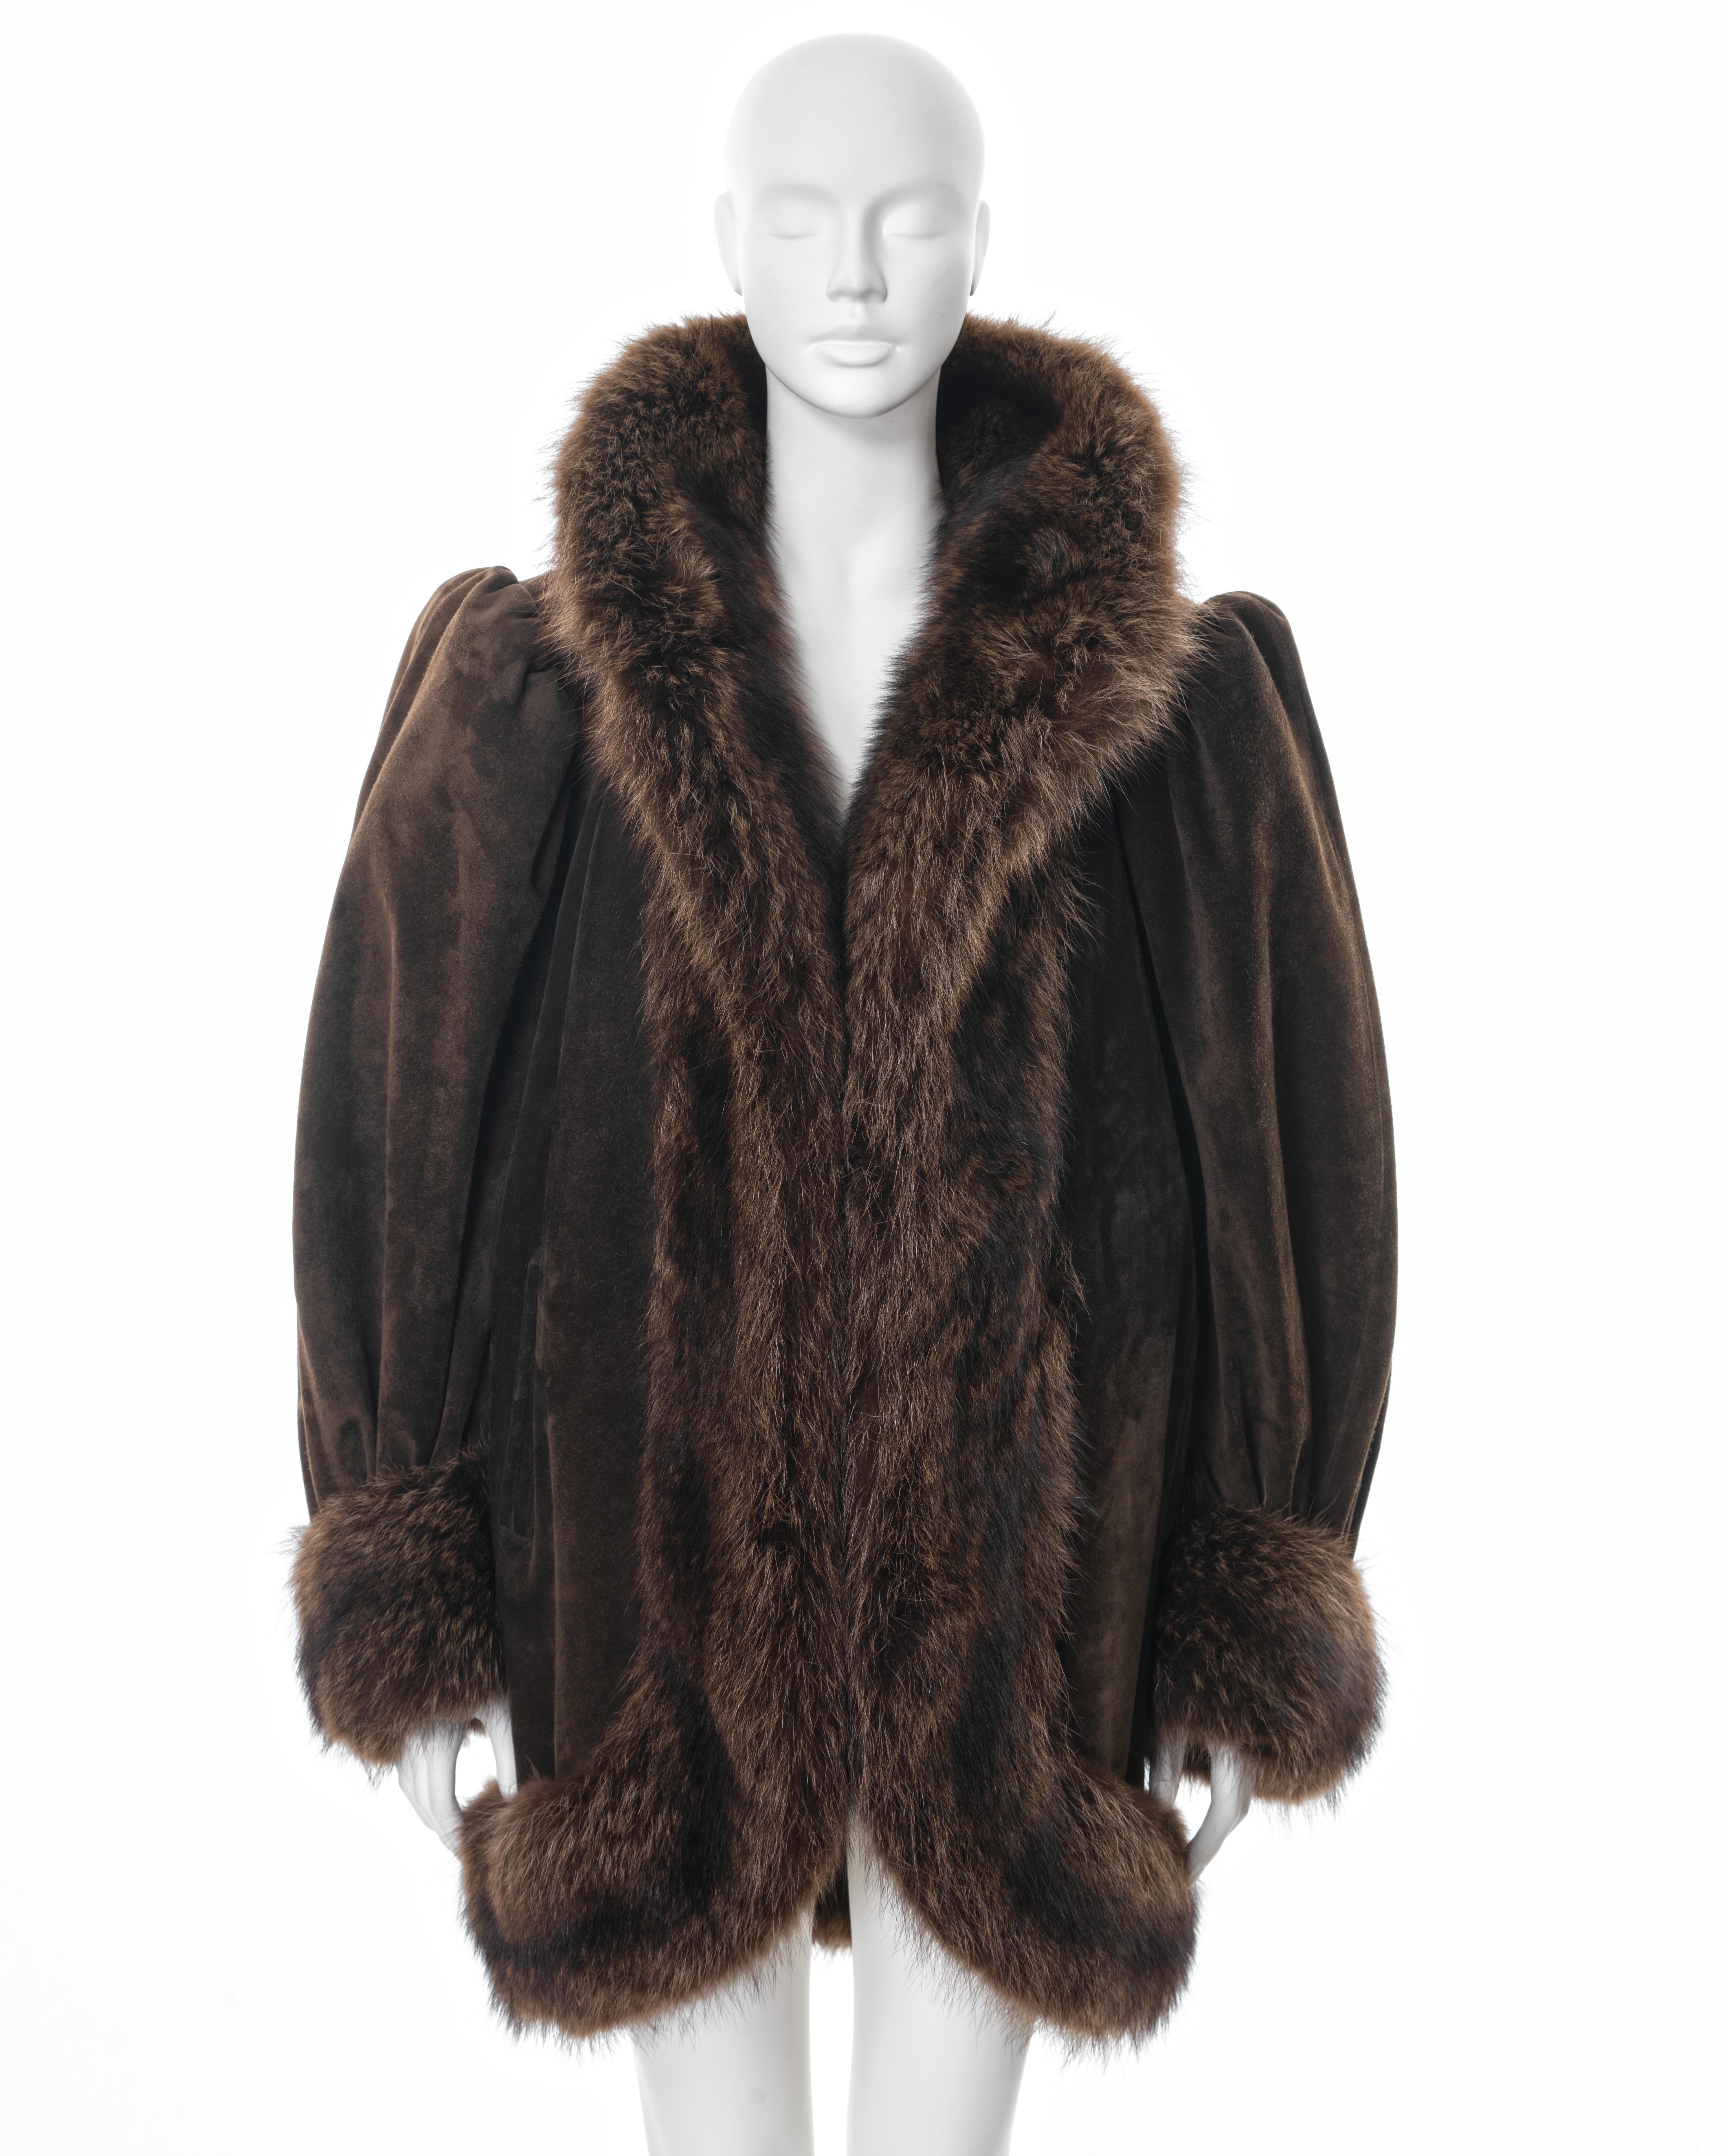 ▪ Yves Saint Laurent Haute Couture cocoon coat 
▪ Sold by One of a Kind Archive
▪ Fall-Winter 1983 
▪ Constructed from brown suede 
▪ Beaver fur trim 
▪ Oversized fit 
▪ Structured shoulders 
▪ Silk lining 
▪ Size approx. Medium 
▪ Made in